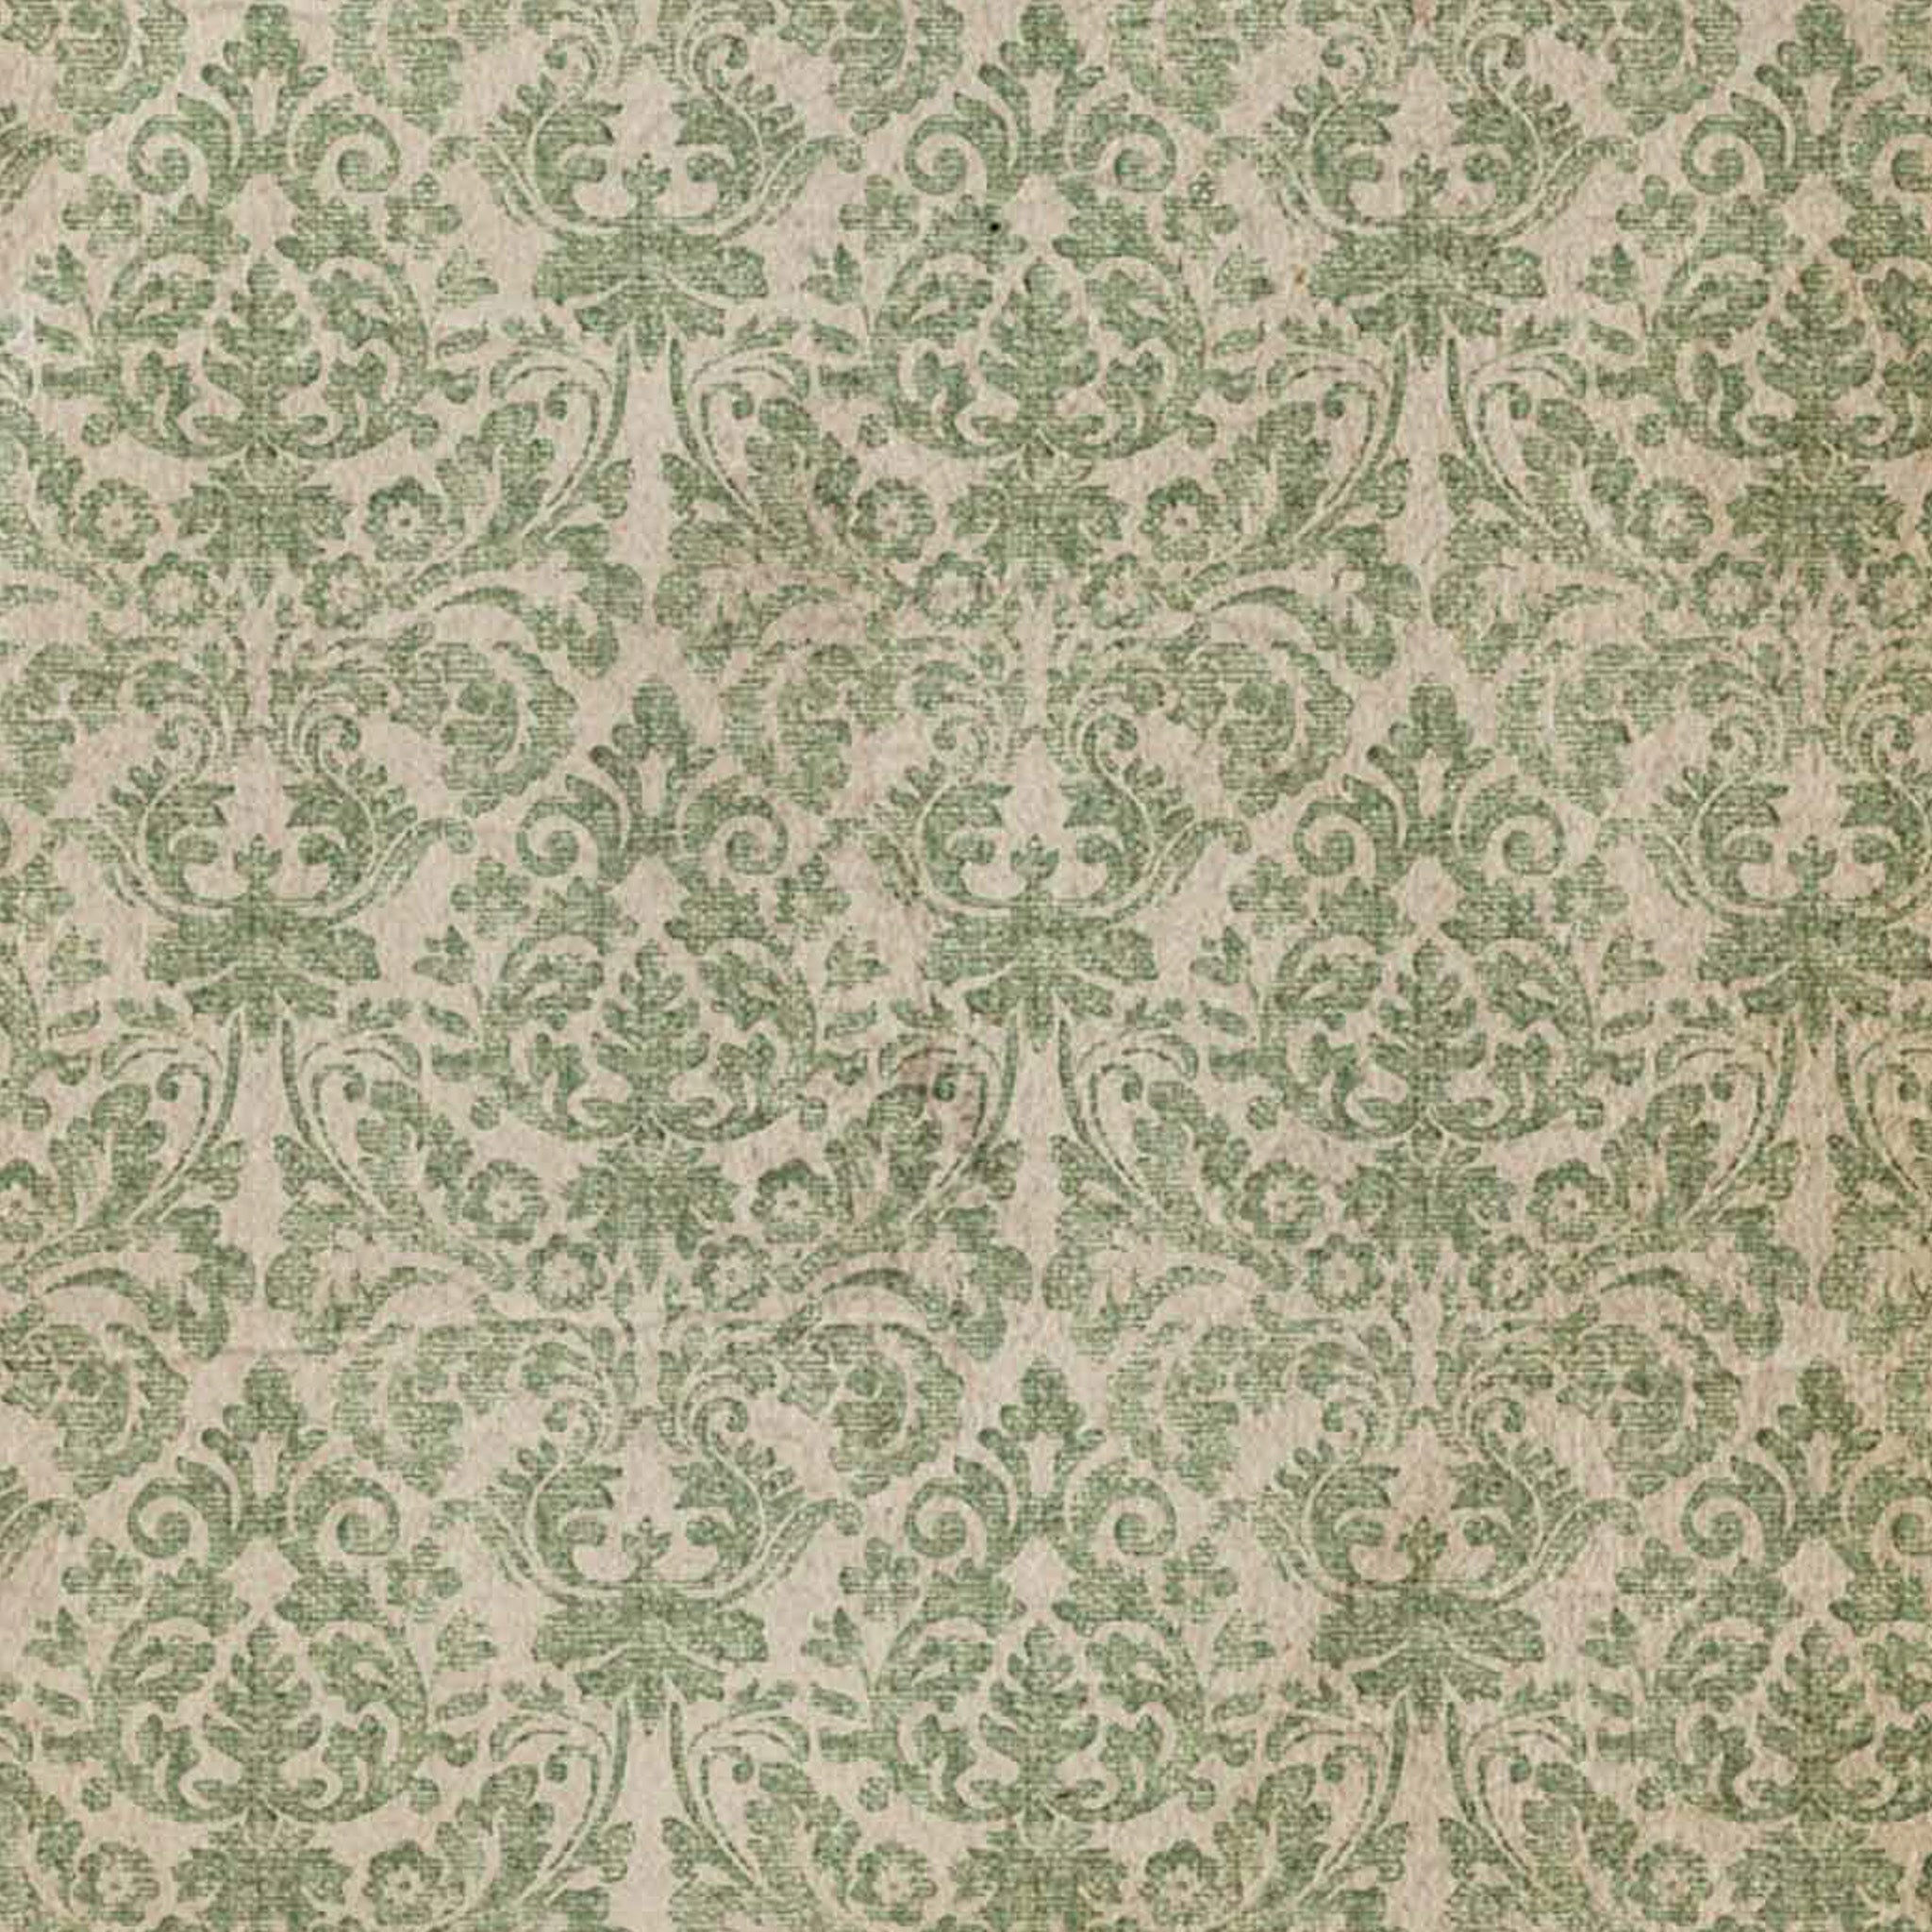 Vintage style Wallpaper Damask A0 Decoupage Rice Paper close up.